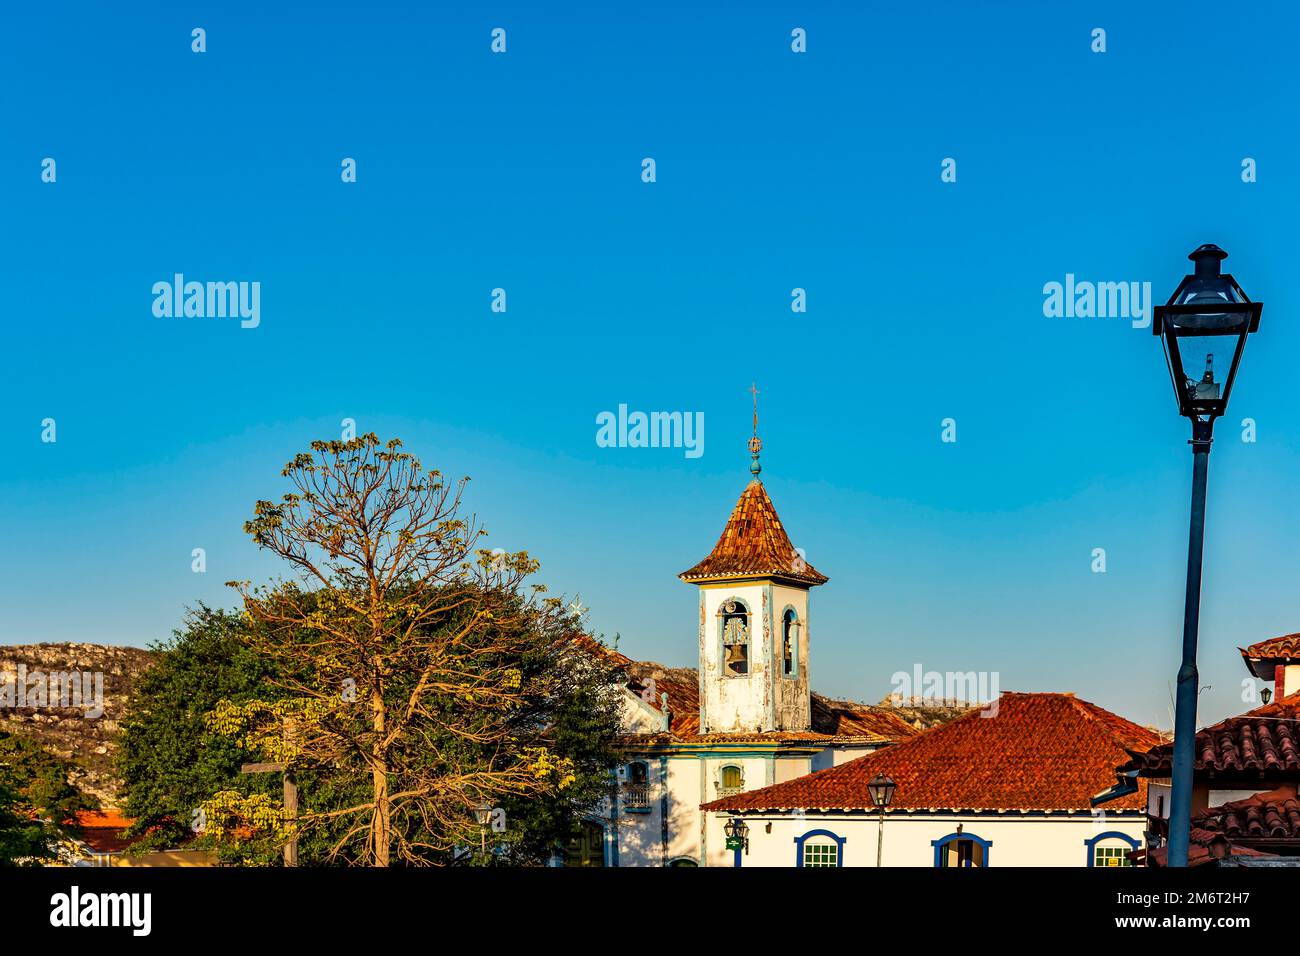 Baroque church tower with bell rising through the trees and roofs Stock Photo